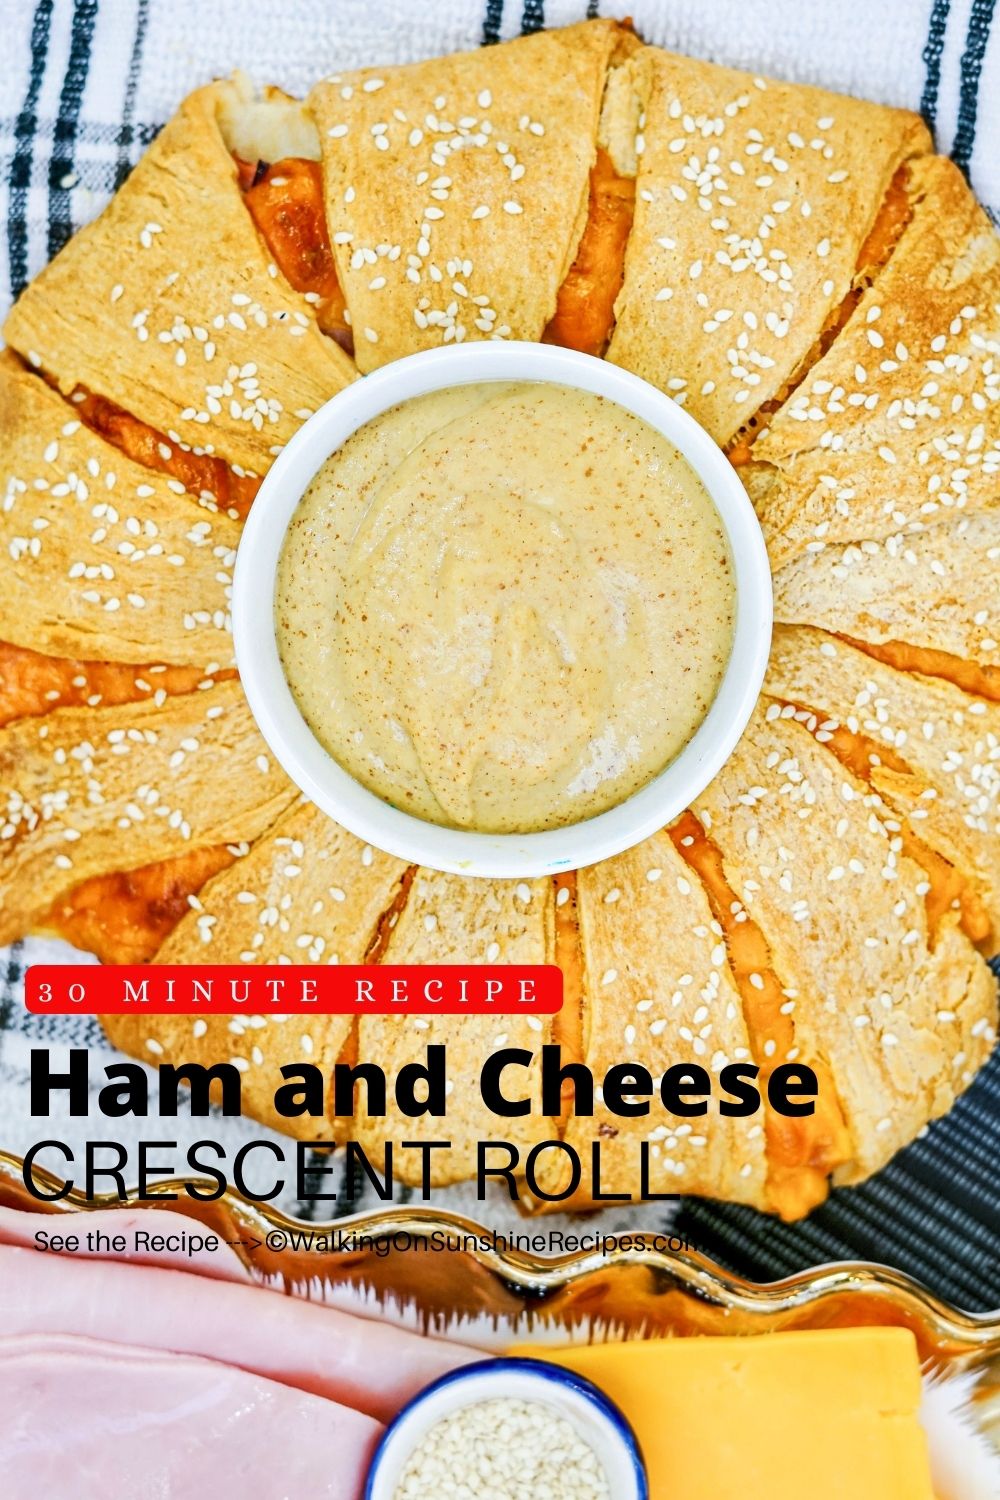 ham and cheese crescent rolls.